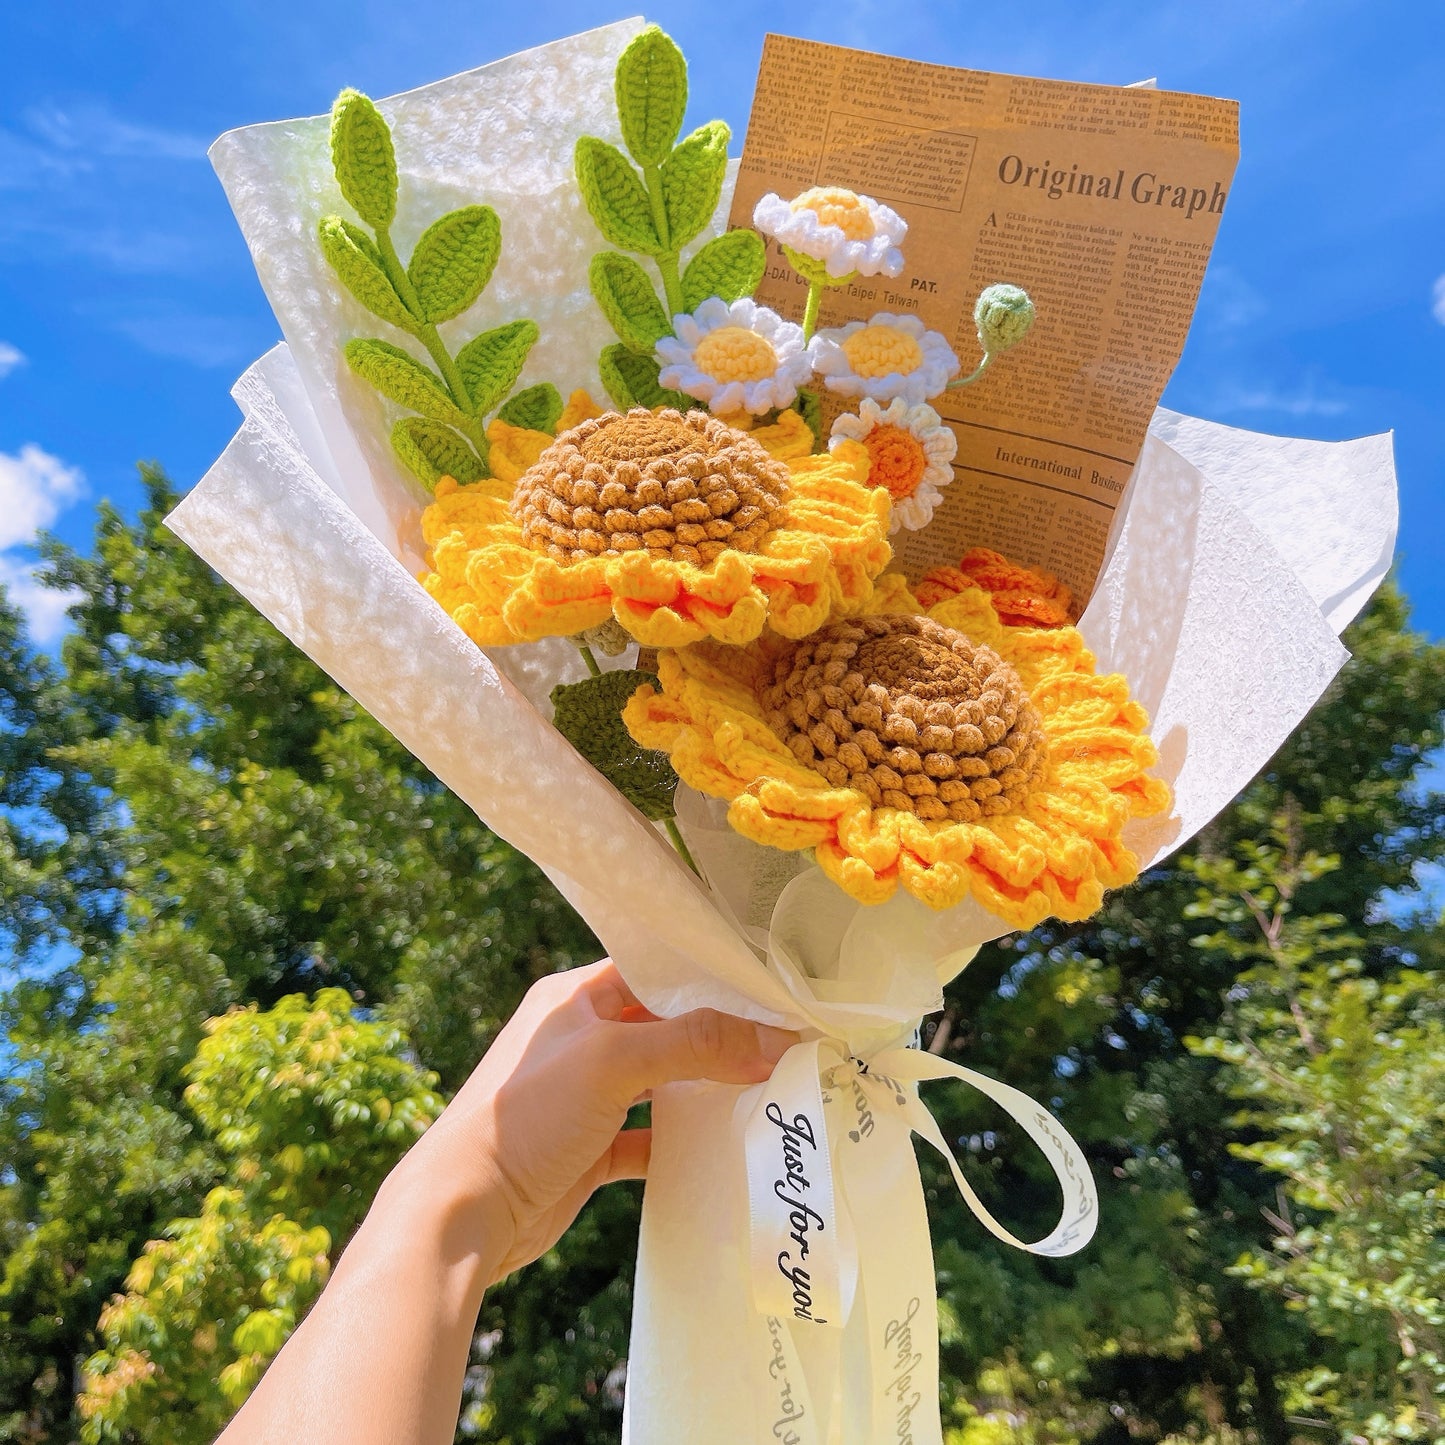 Handmade Crochet Sunflower and Daisy Bouquet in Kraft Paper Wrap with Brown Newspaper for Graduation Summer Vacation Appreciation